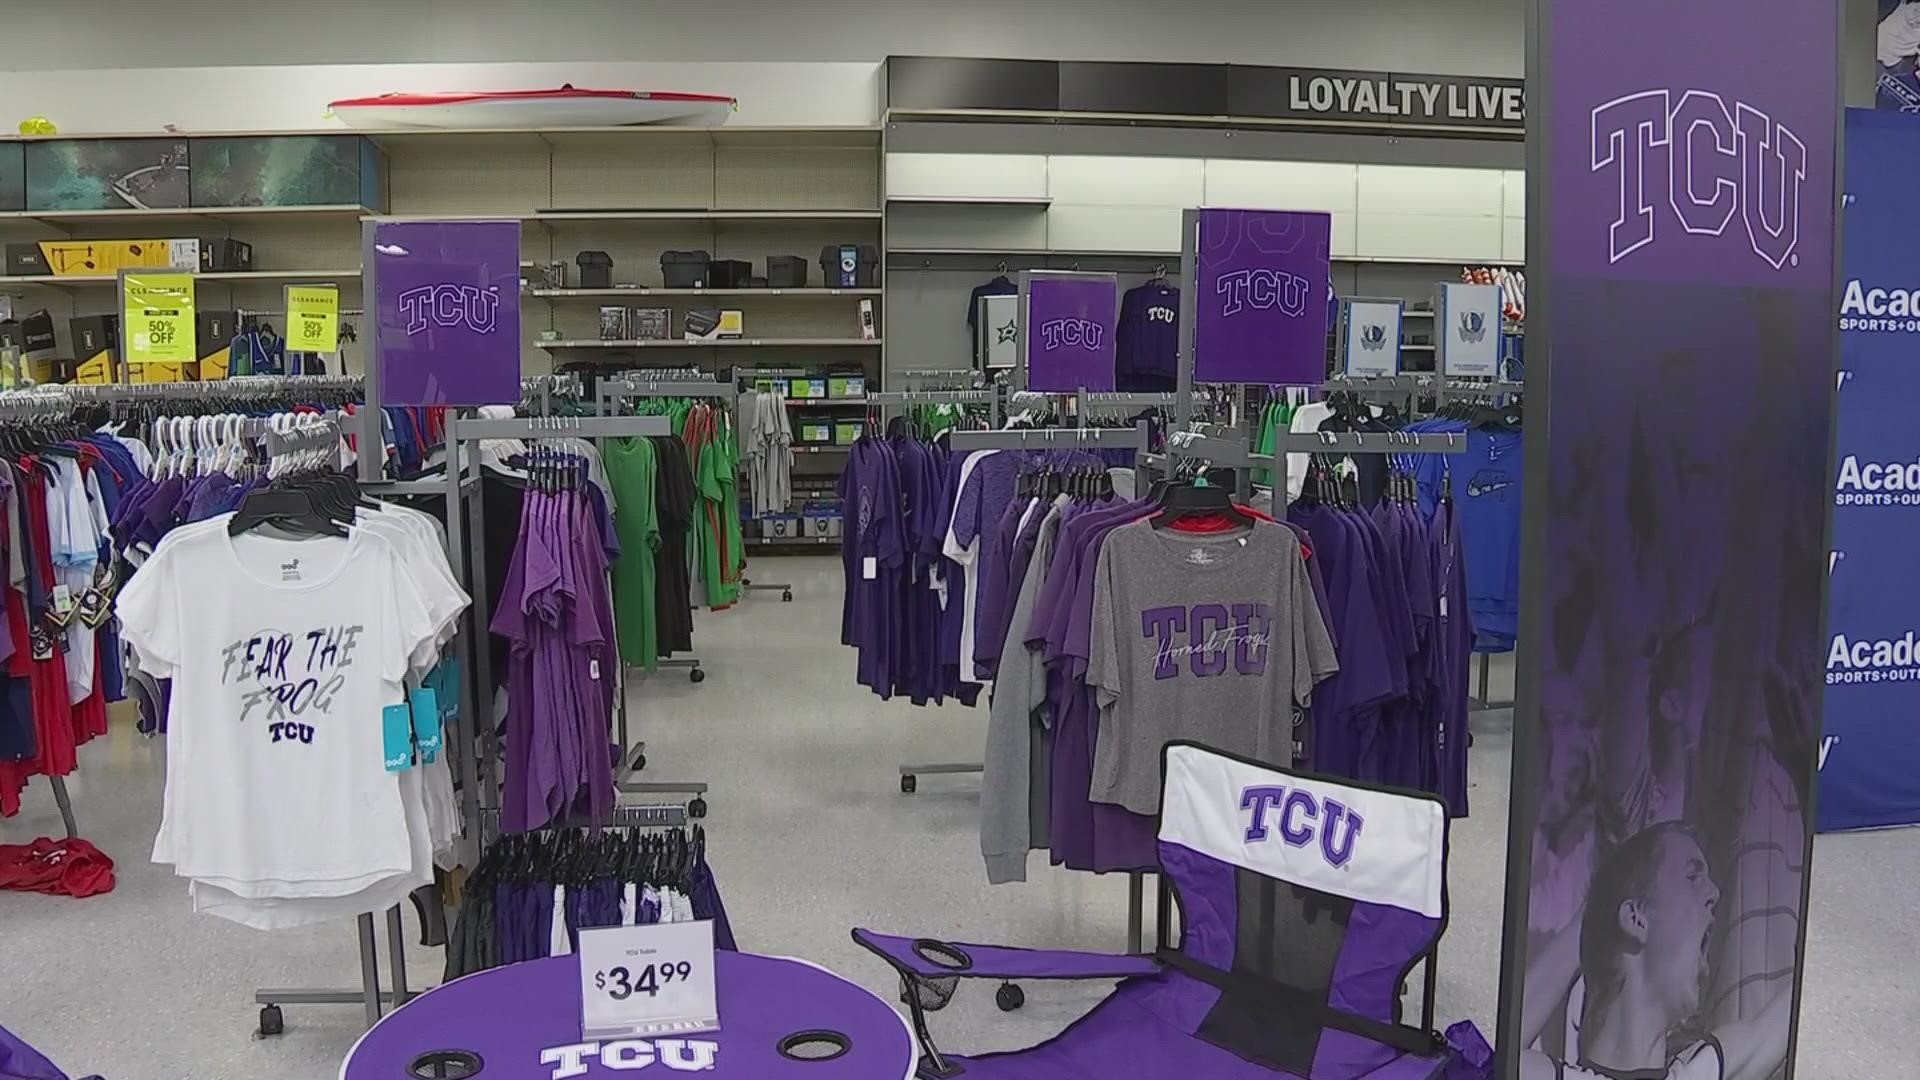 Before the kickoff, there were loads of shirts, hats and apparel for each team winning the championship. So where does TCU's unusable gear go?